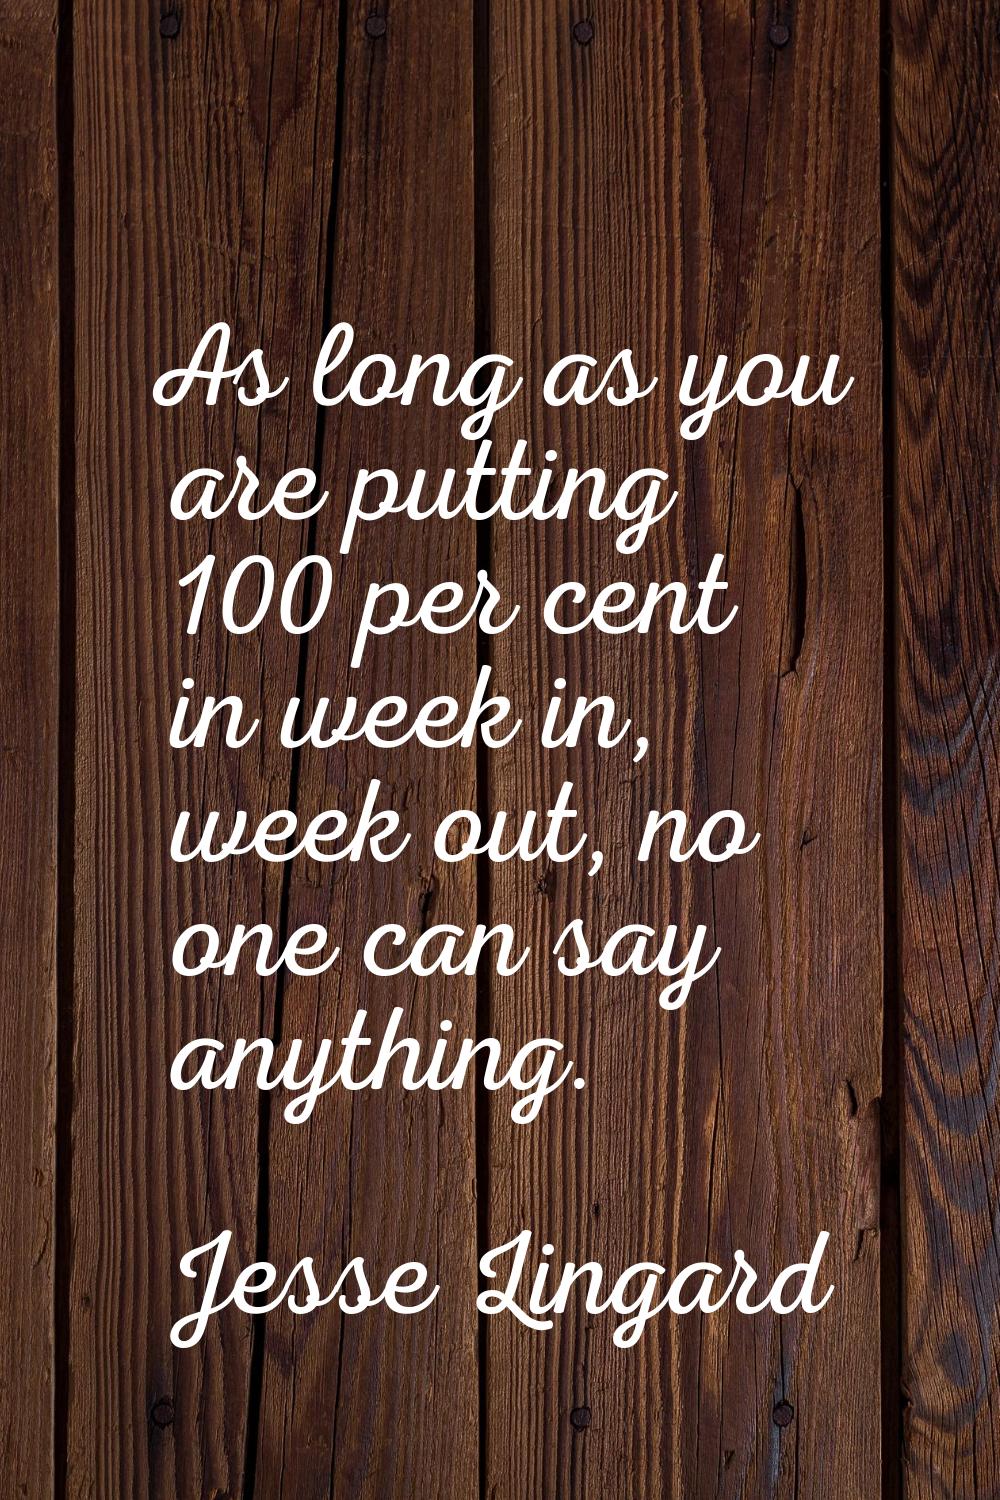 As long as you are putting 100 per cent in week in, week out, no one can say anything.